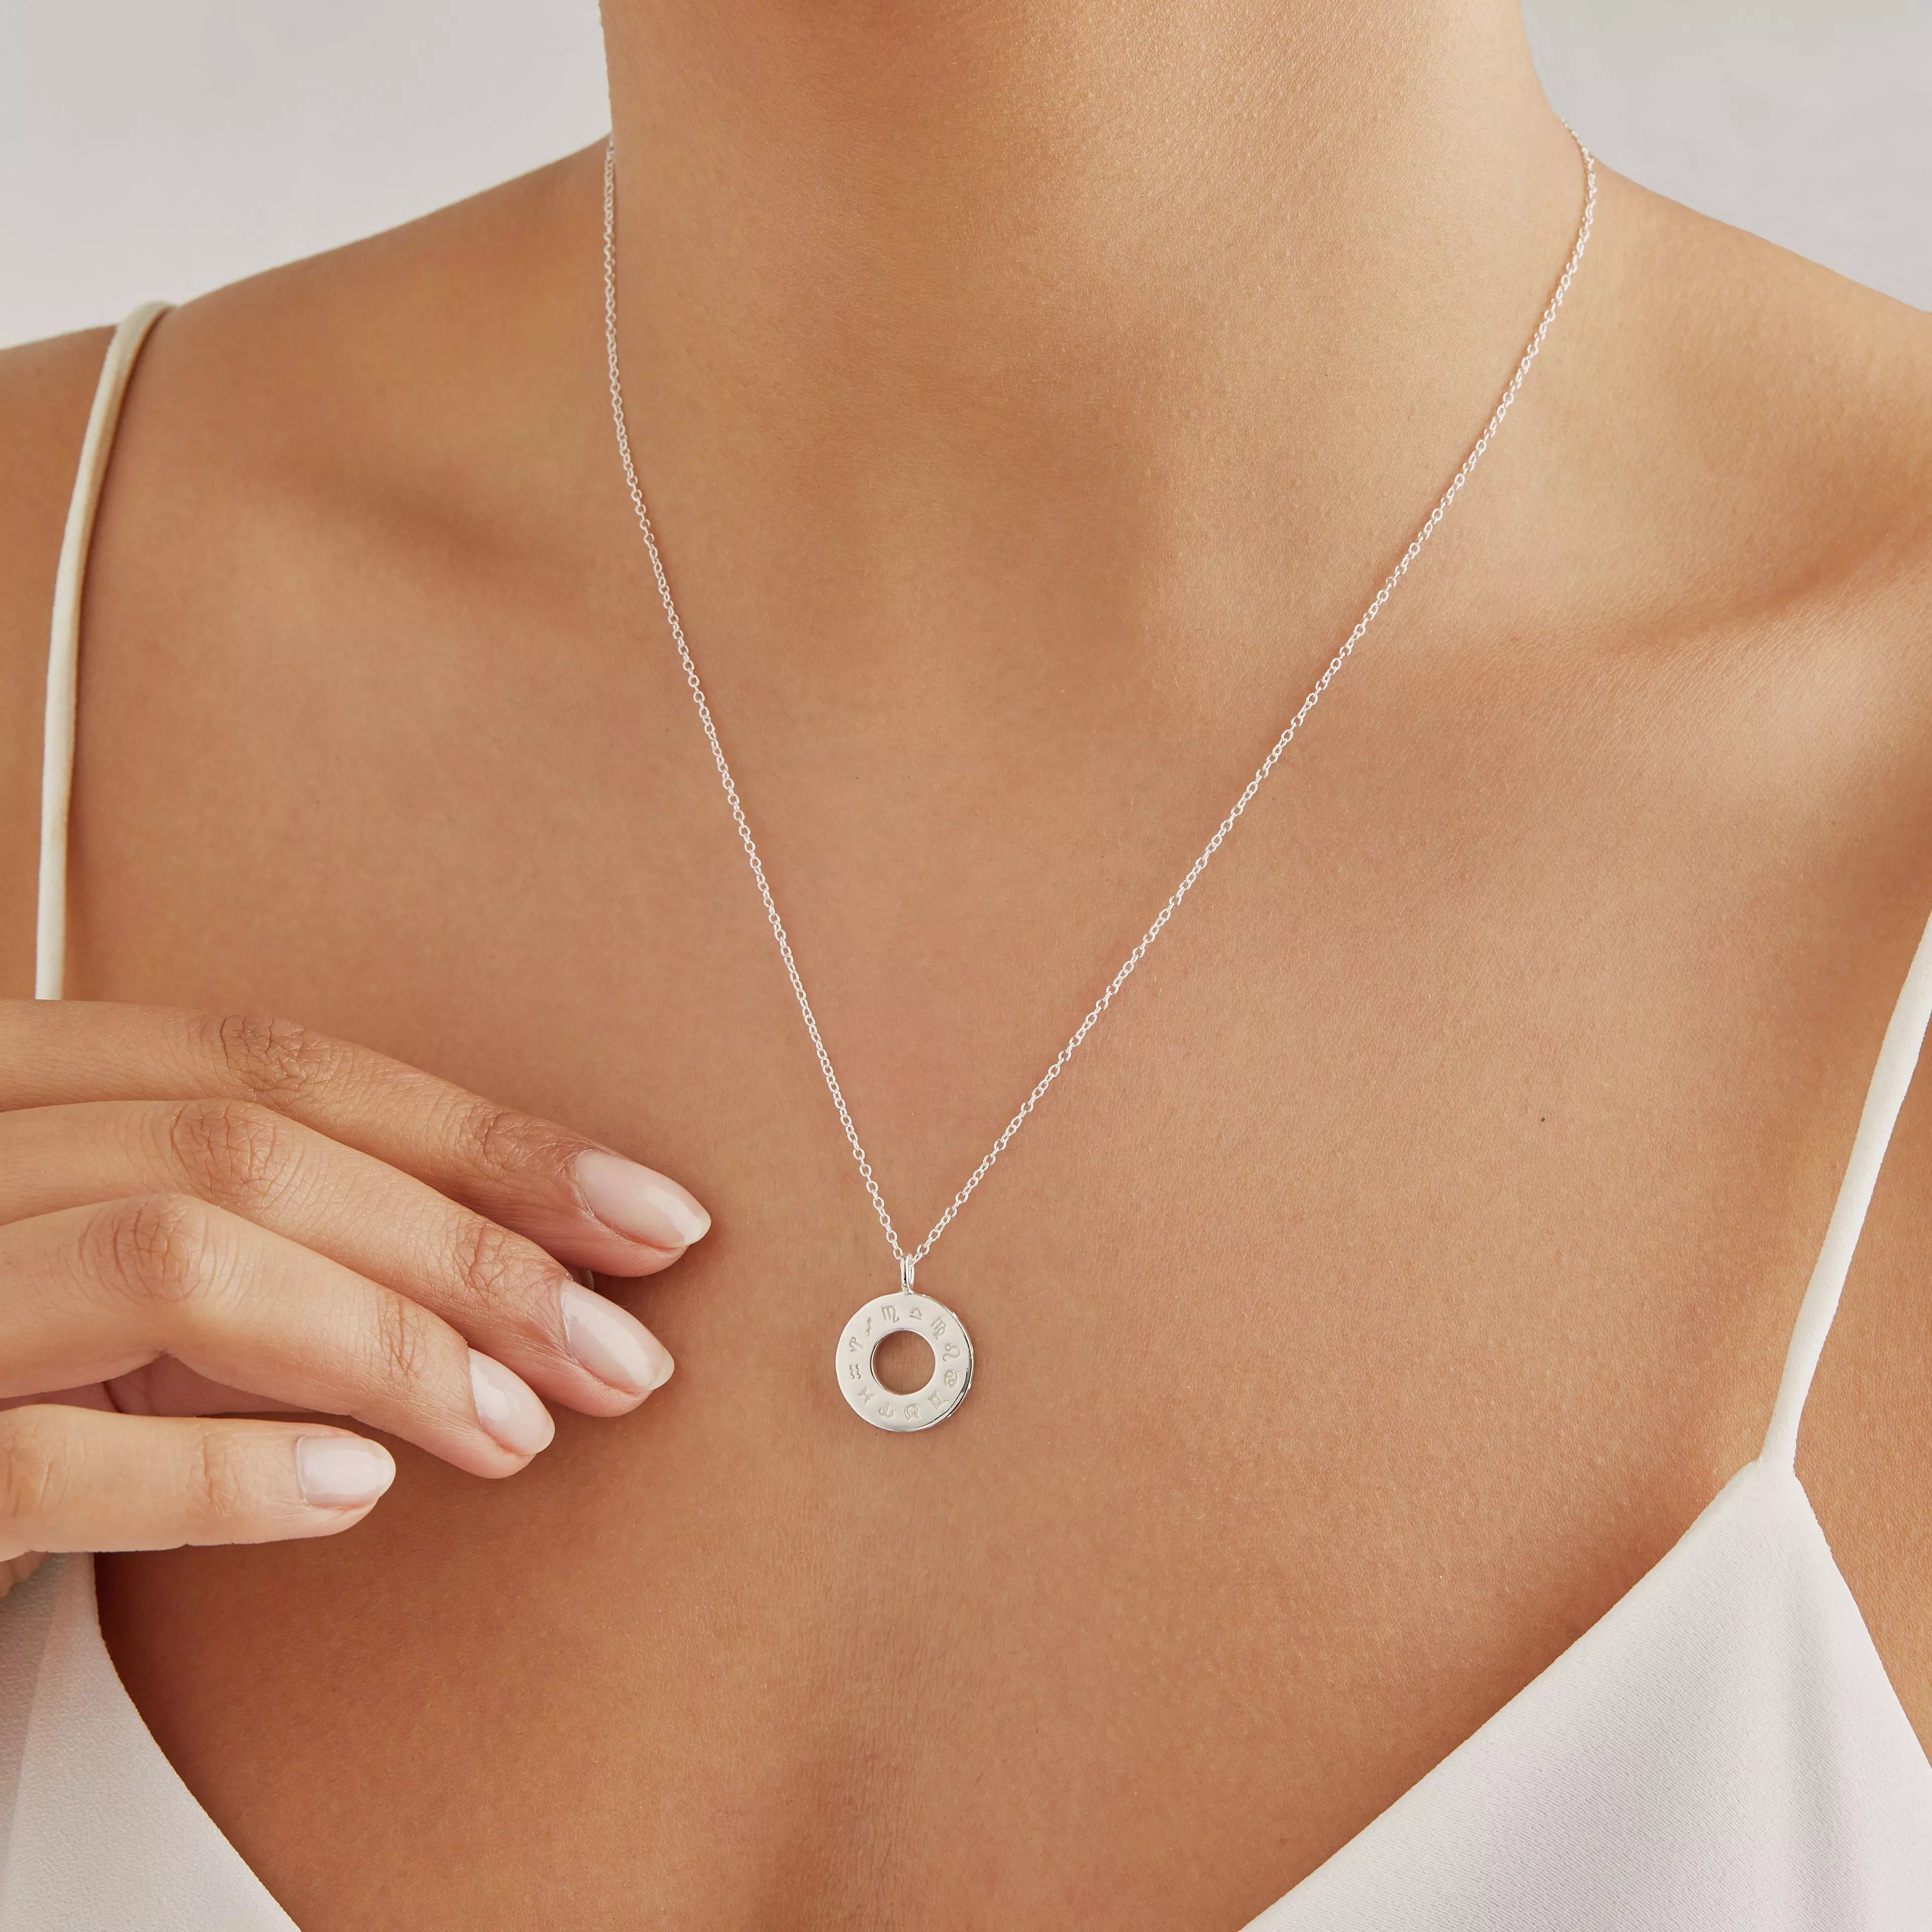 Silver zodiac birthstone necklace around the neck of a woman wearing a white strappy top